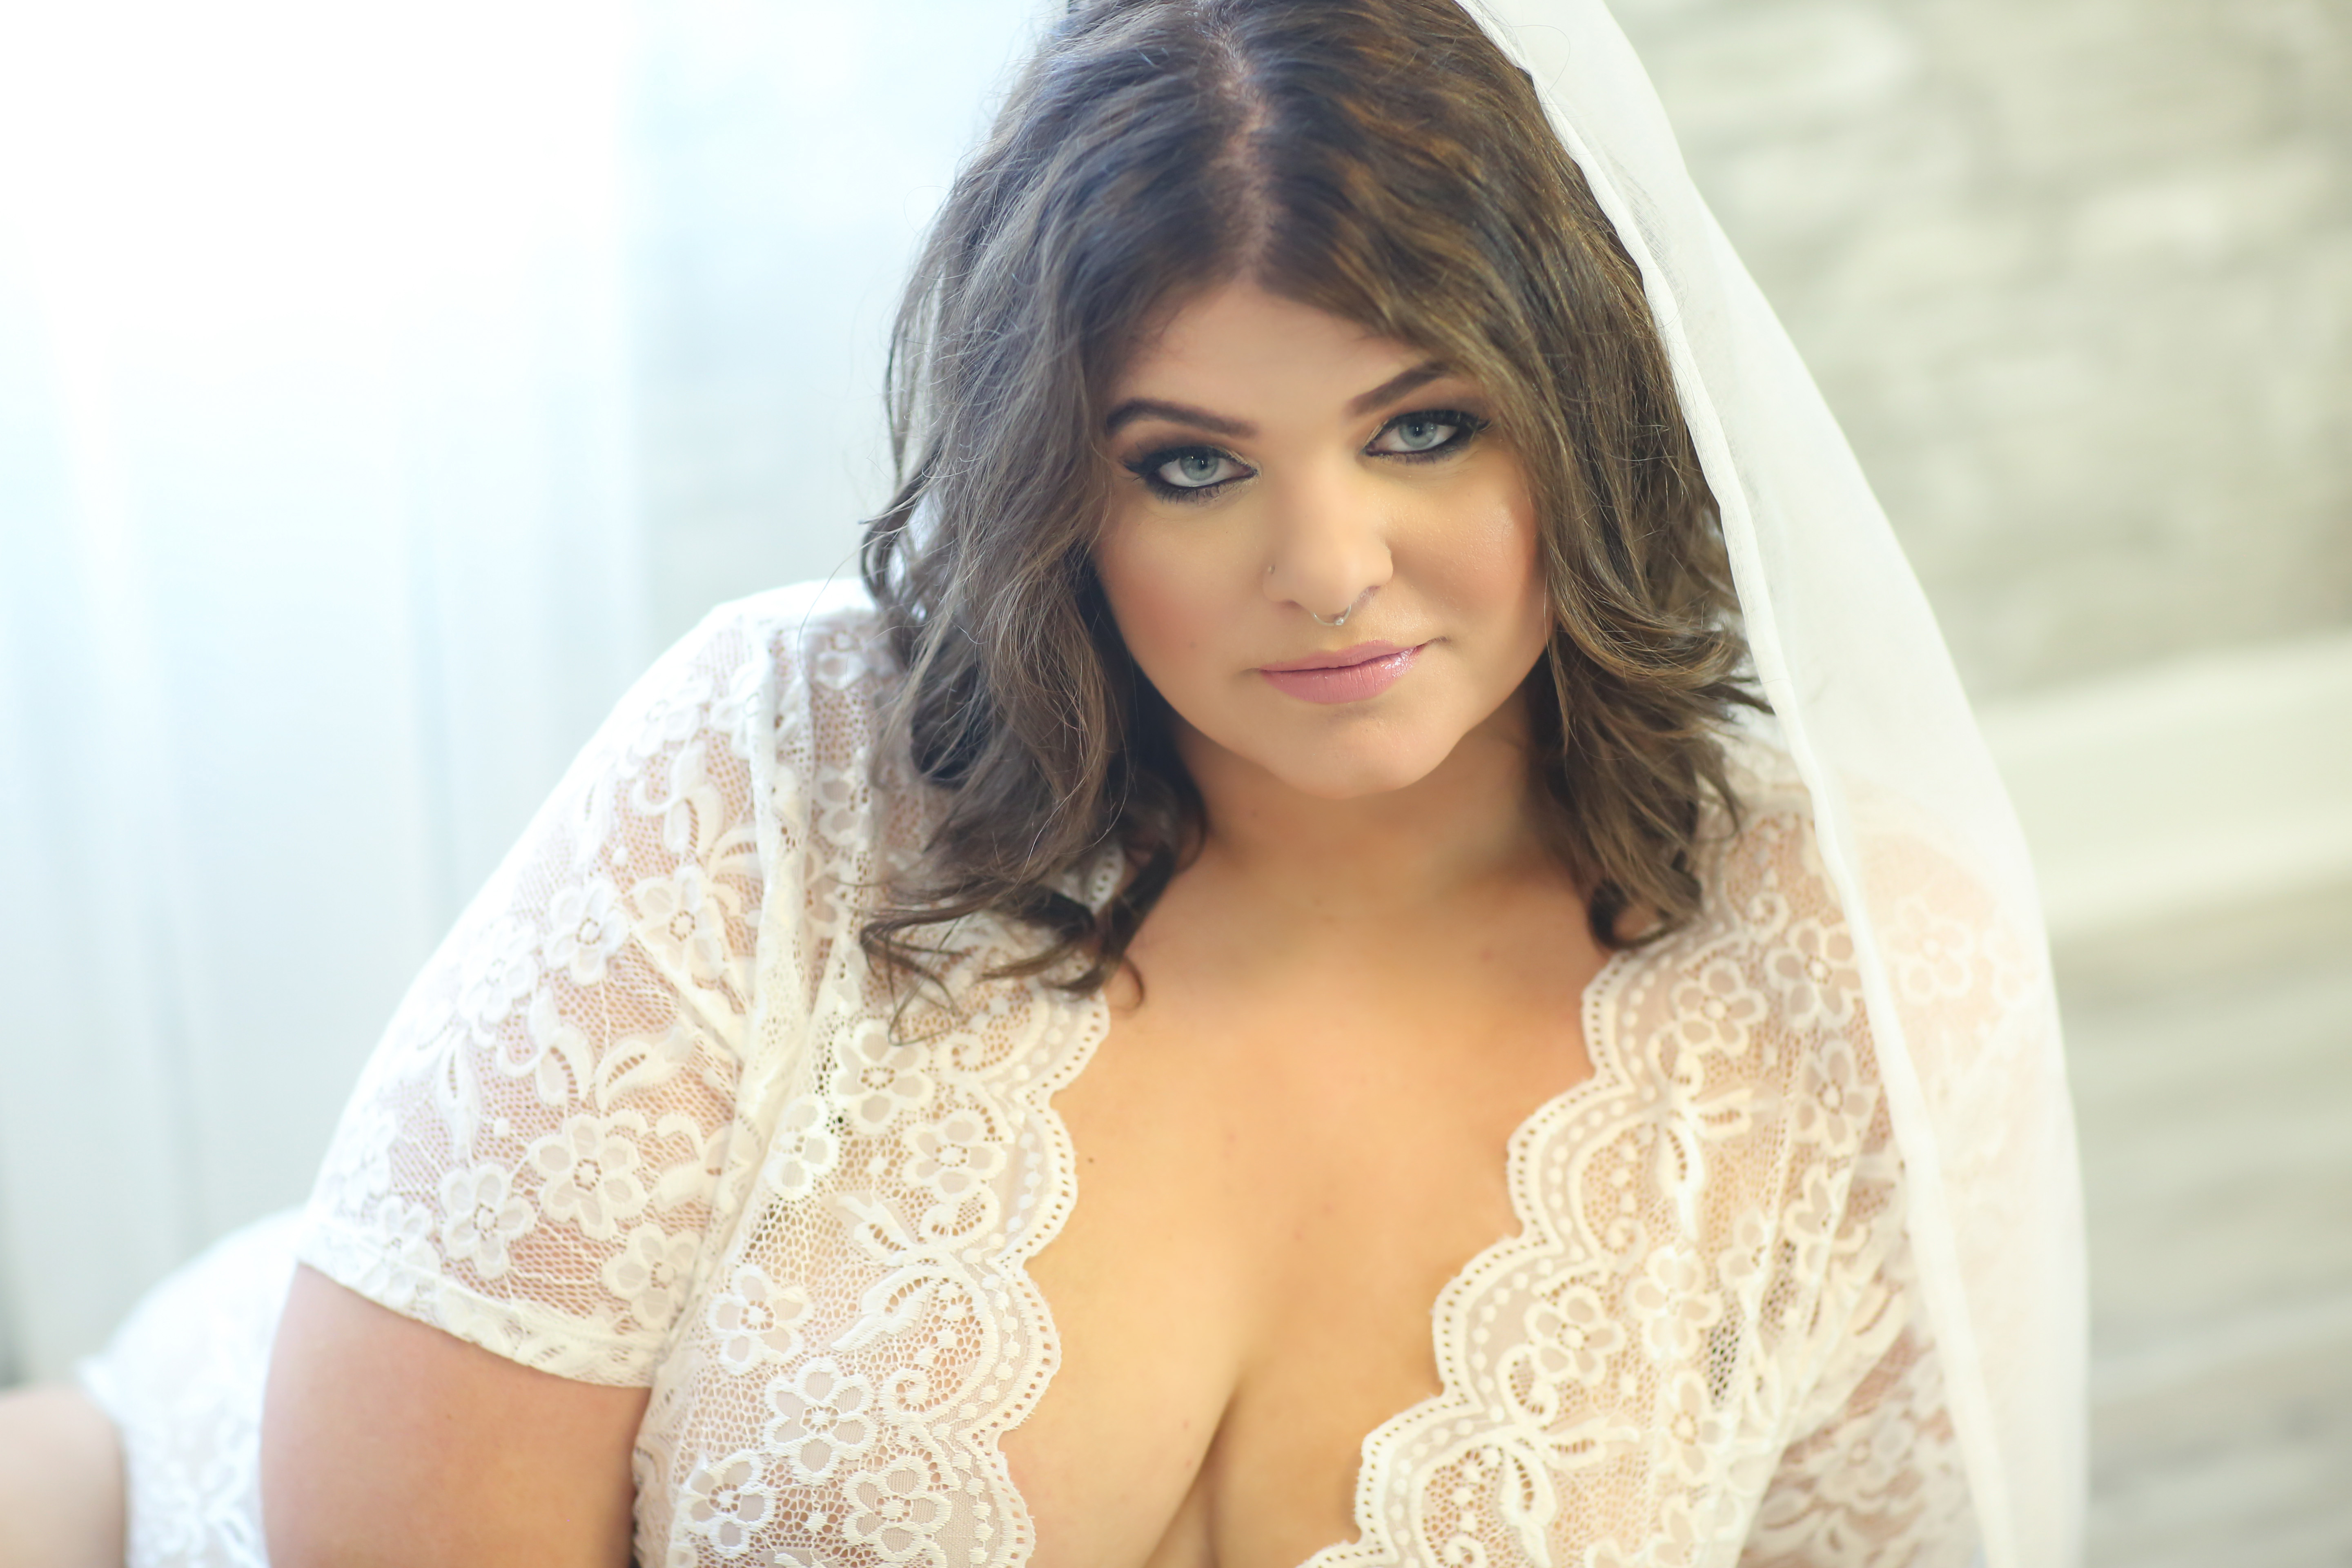 Empowering Benefits of Bridal Boudoir Photography